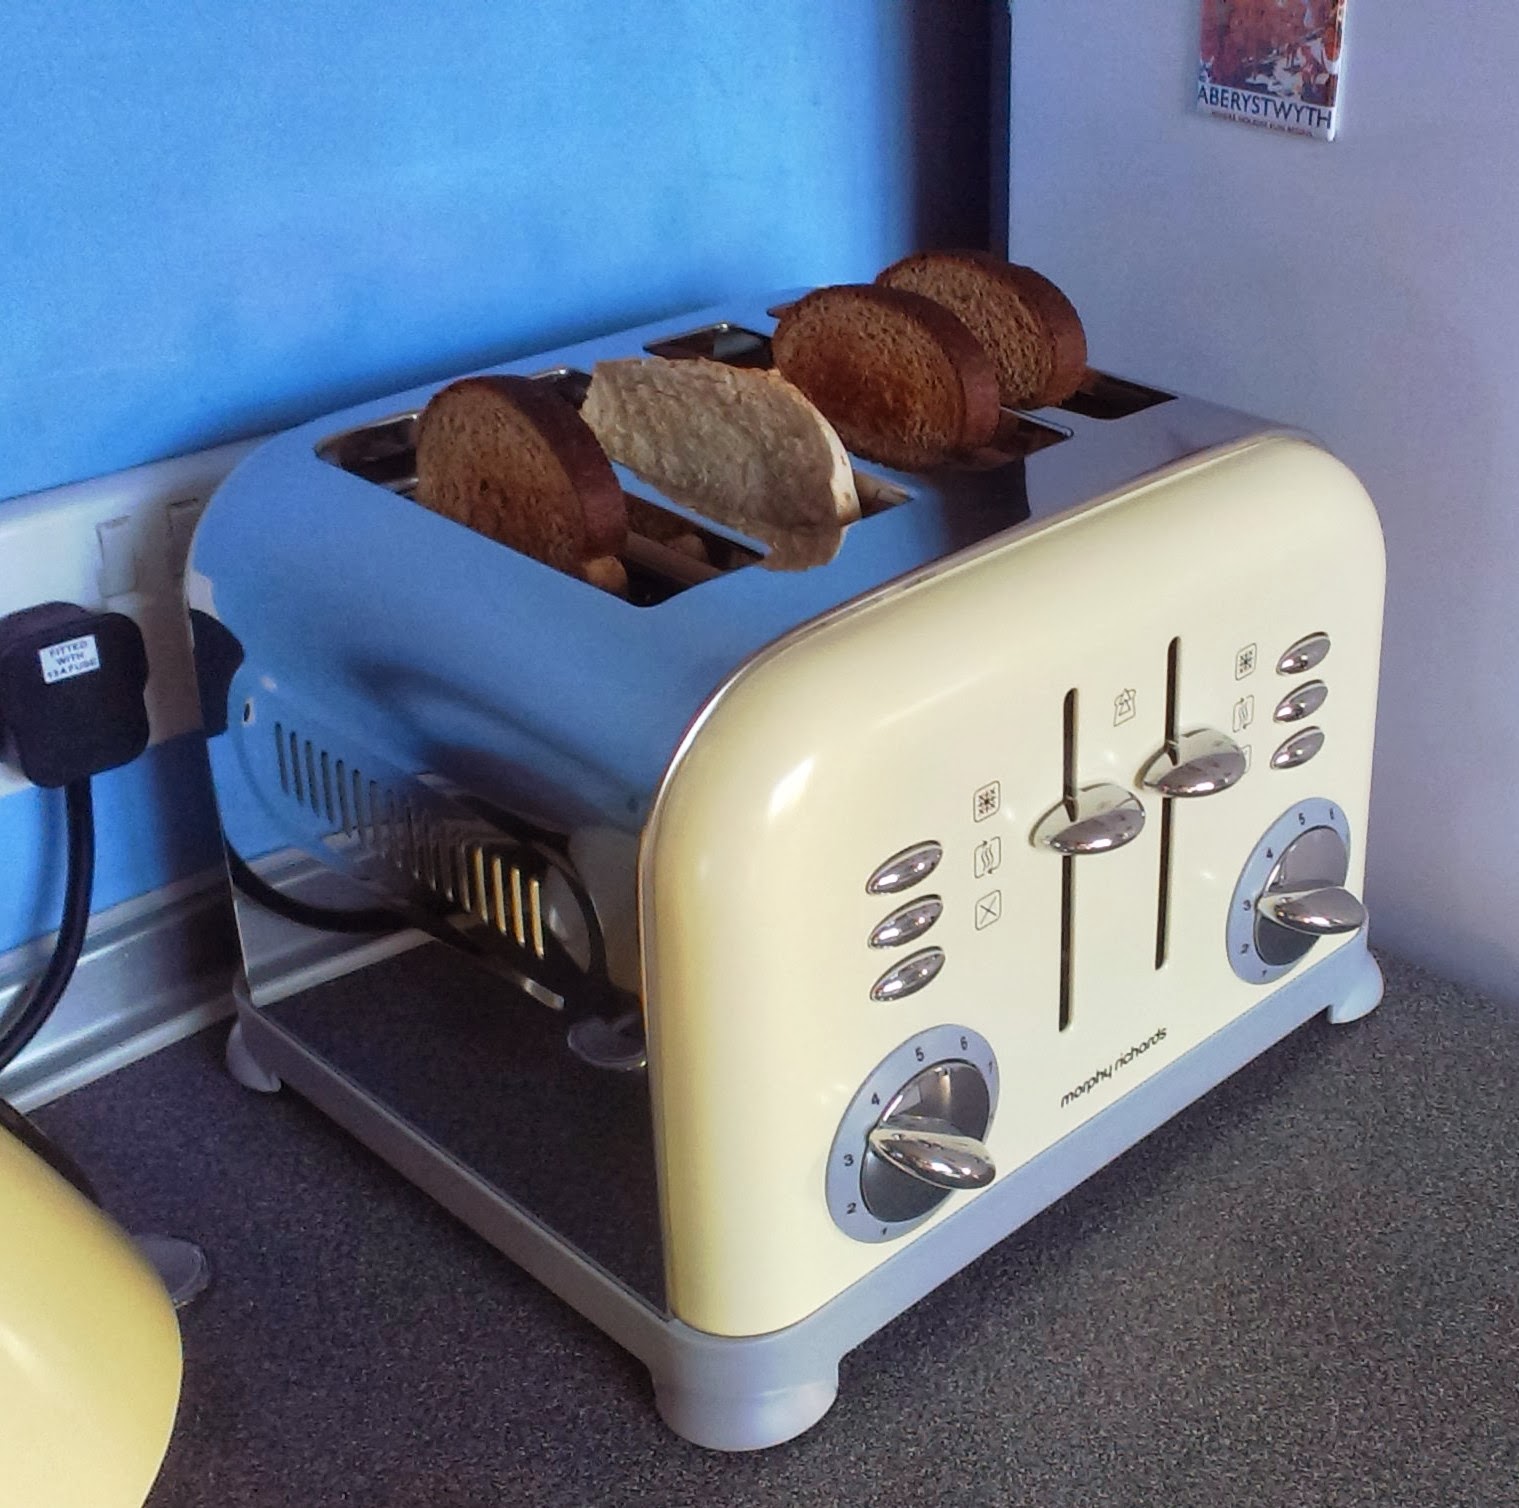 Morphy Richards Accents Toaster